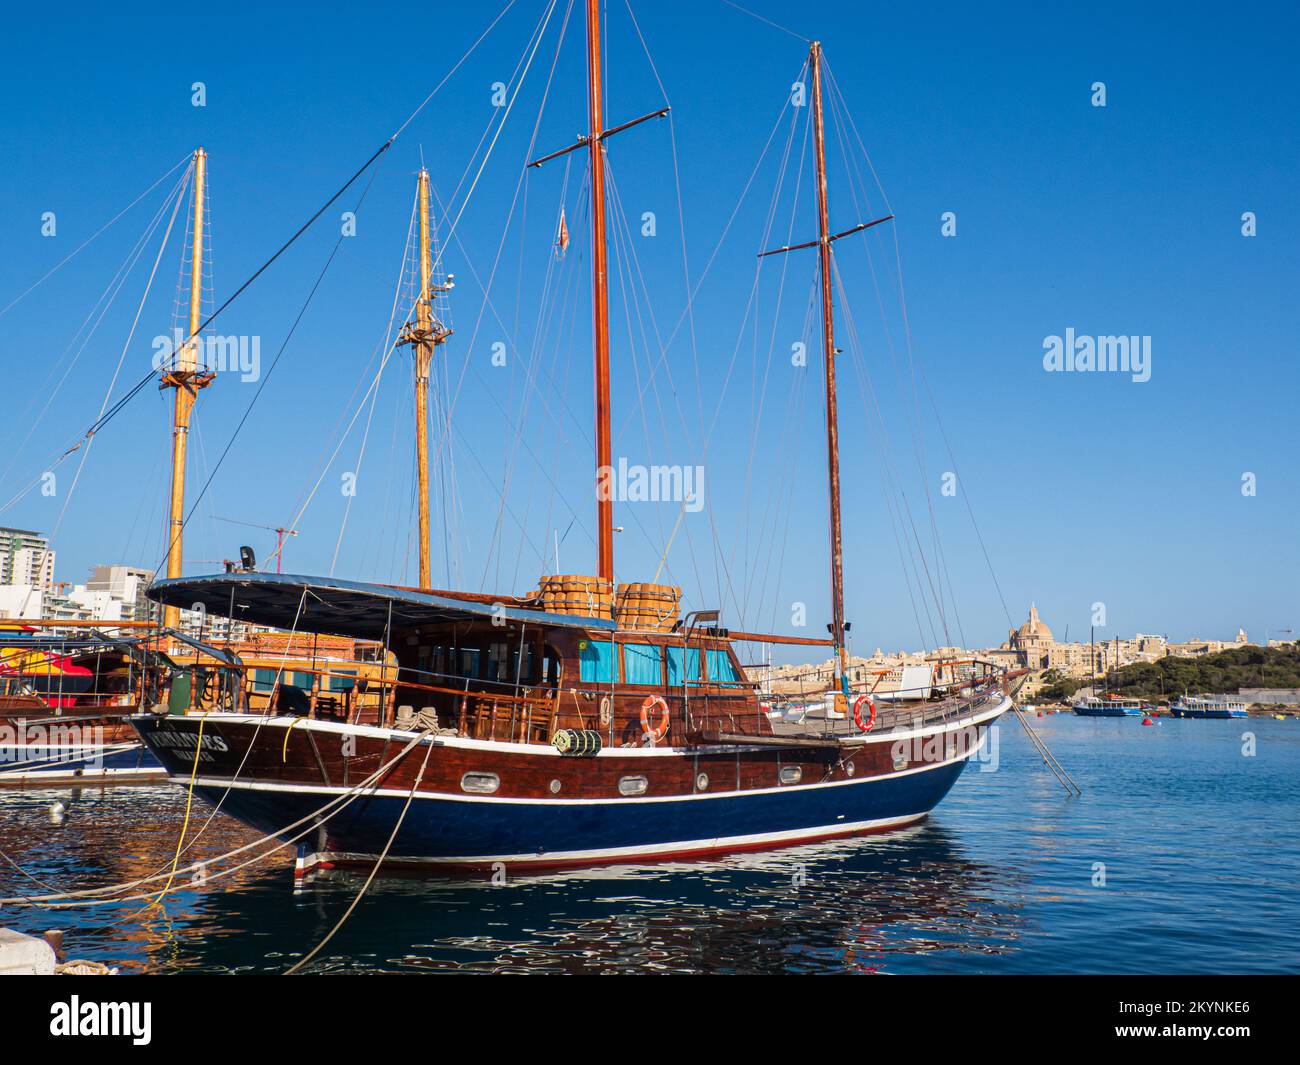 Sliema, Malta - May 2021: A large wooden sailing boat in the harbor in the Sliema district. Malta. Europe Stock Photo